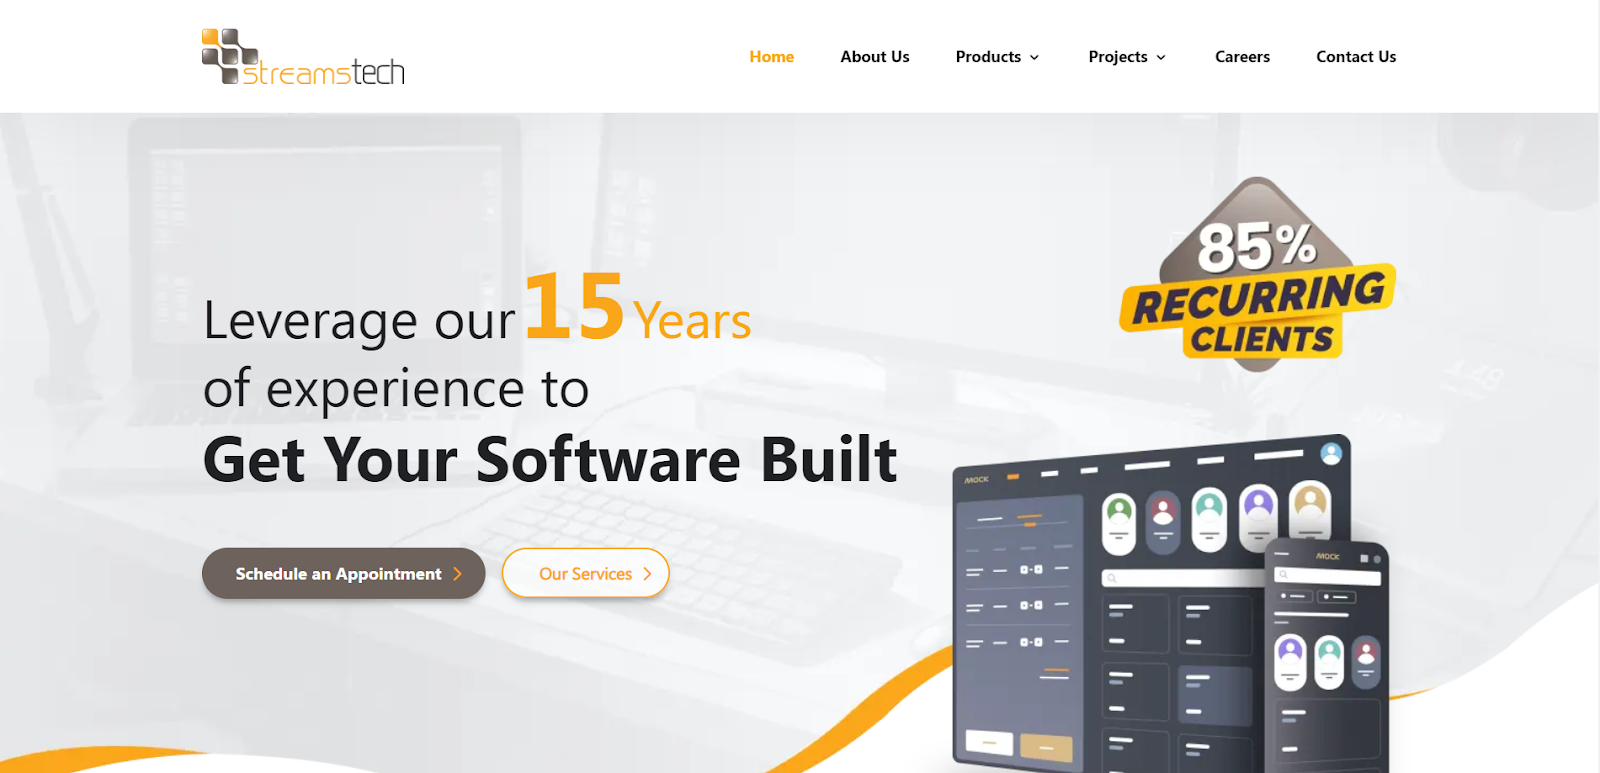 Steams Tech is among the all software company in Bangladesh

